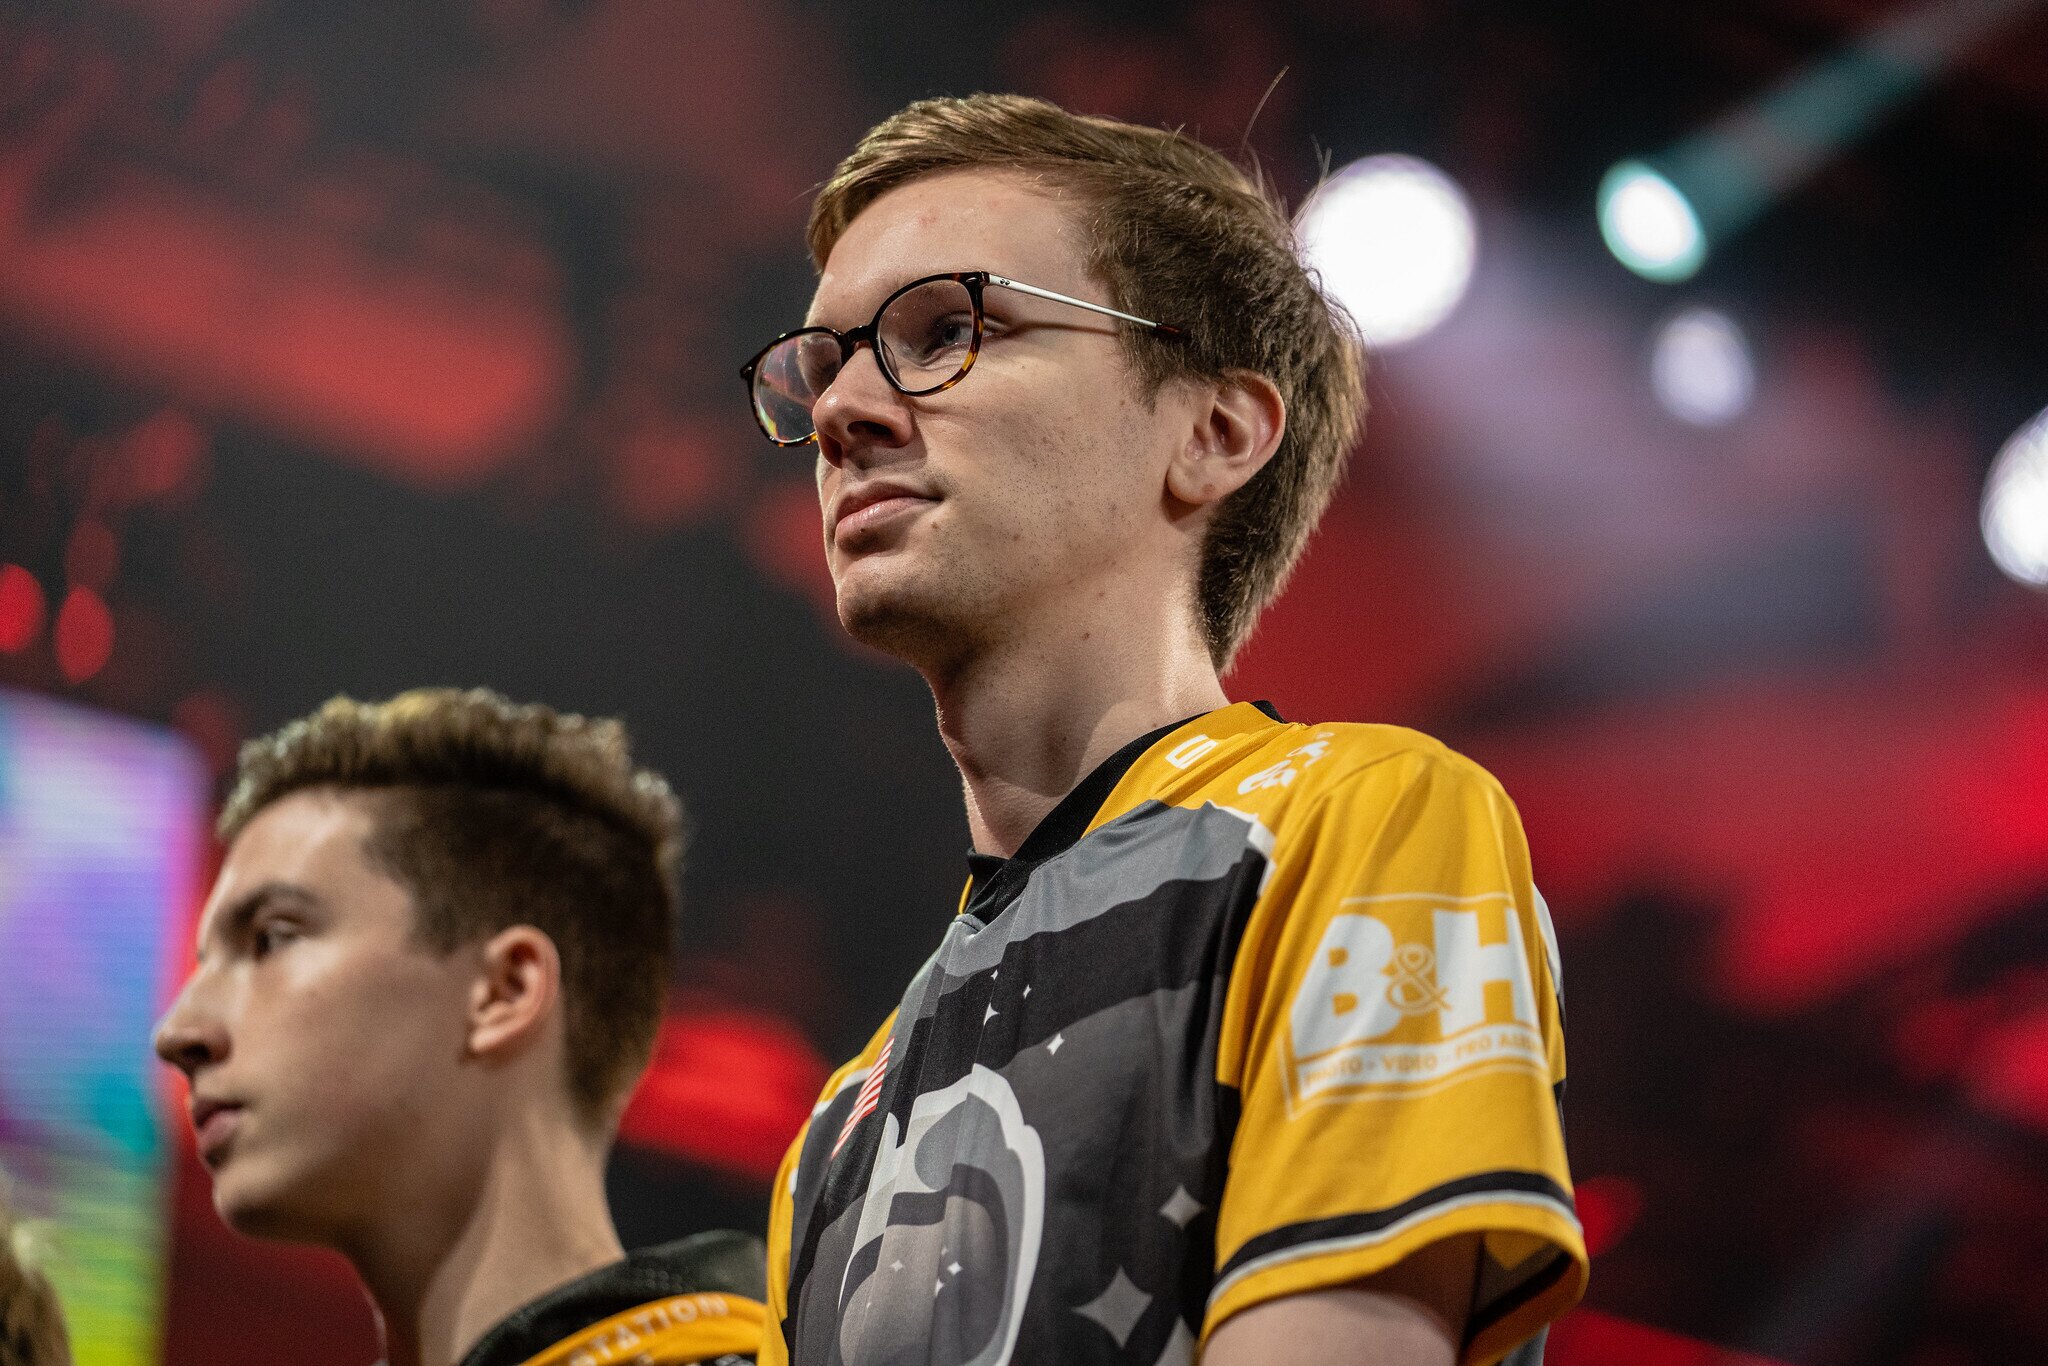 Chala signs with TSM after winning the Season 11 North American Challenger League (Photo via Ubisoft)